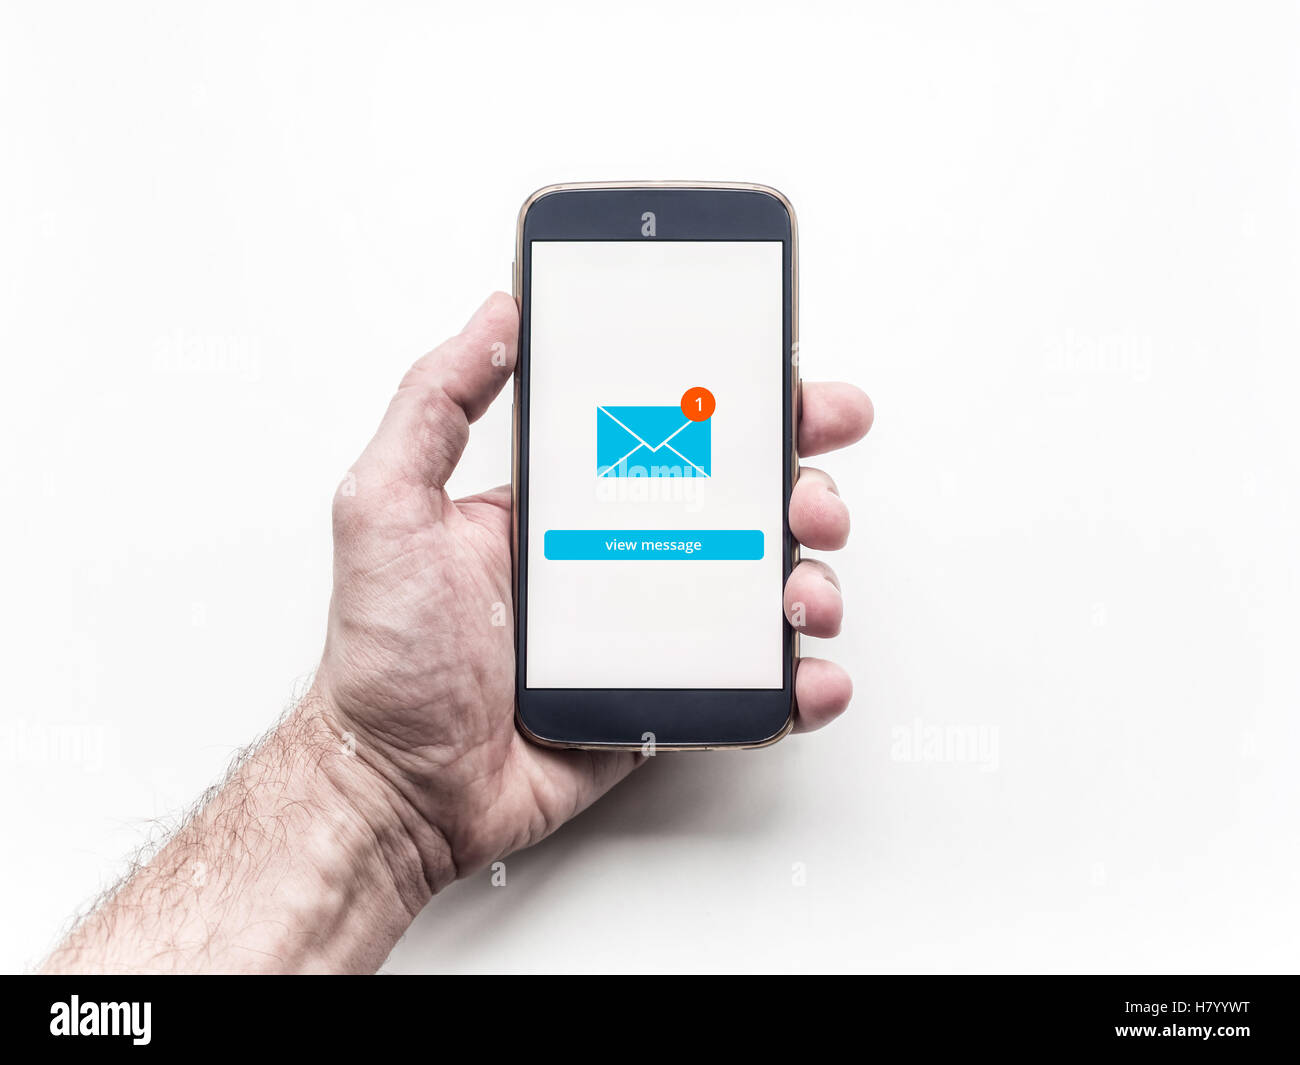 Close up of smartphone with Email app interface on screen holding in man's hand. Stock Photo